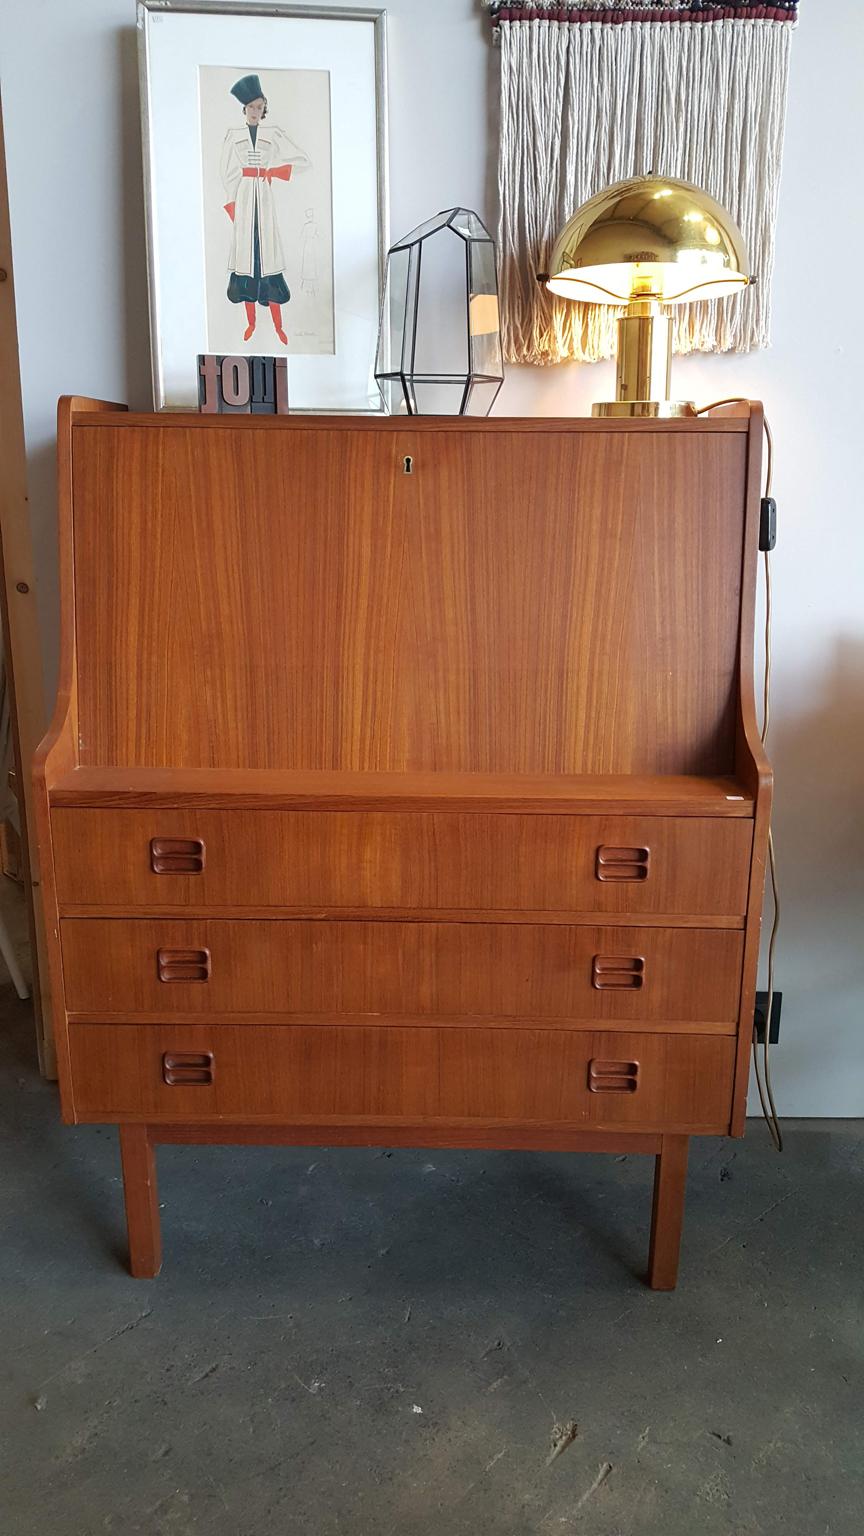 Nice little secretary from Denmark. Square body with a flap and three skirts. Flap lockable, key missing. Behind the flap there are compartments and 2 slippers. The body of the secretary is made of wood with teak veneer, the small drawers hunter the